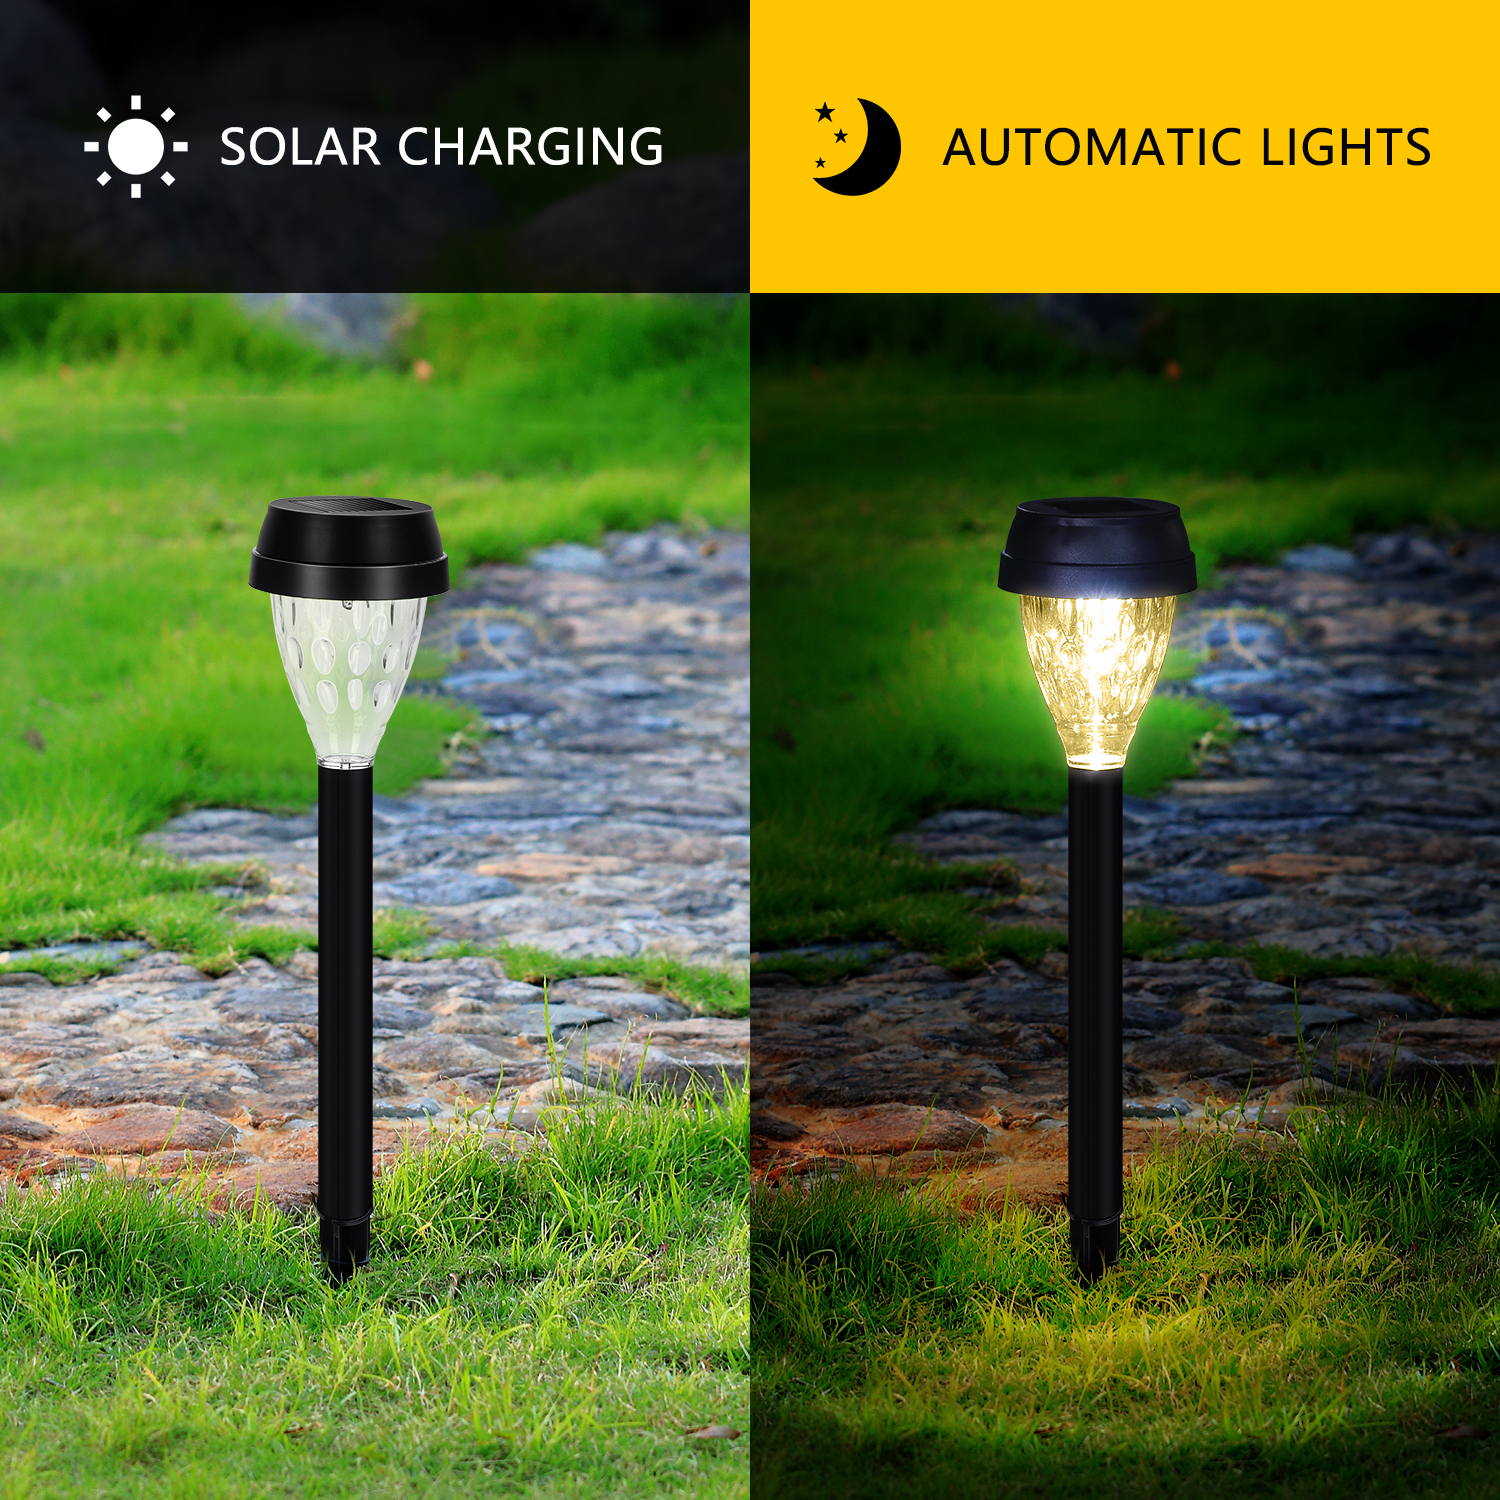 12 Pack Solar Pathway Lights, Aigostar Solar Powered Garden Lights, Waterproof LED Solar Landscape Lights for Patio, Walkway, Lawn, Yard and Driveway, Warm White